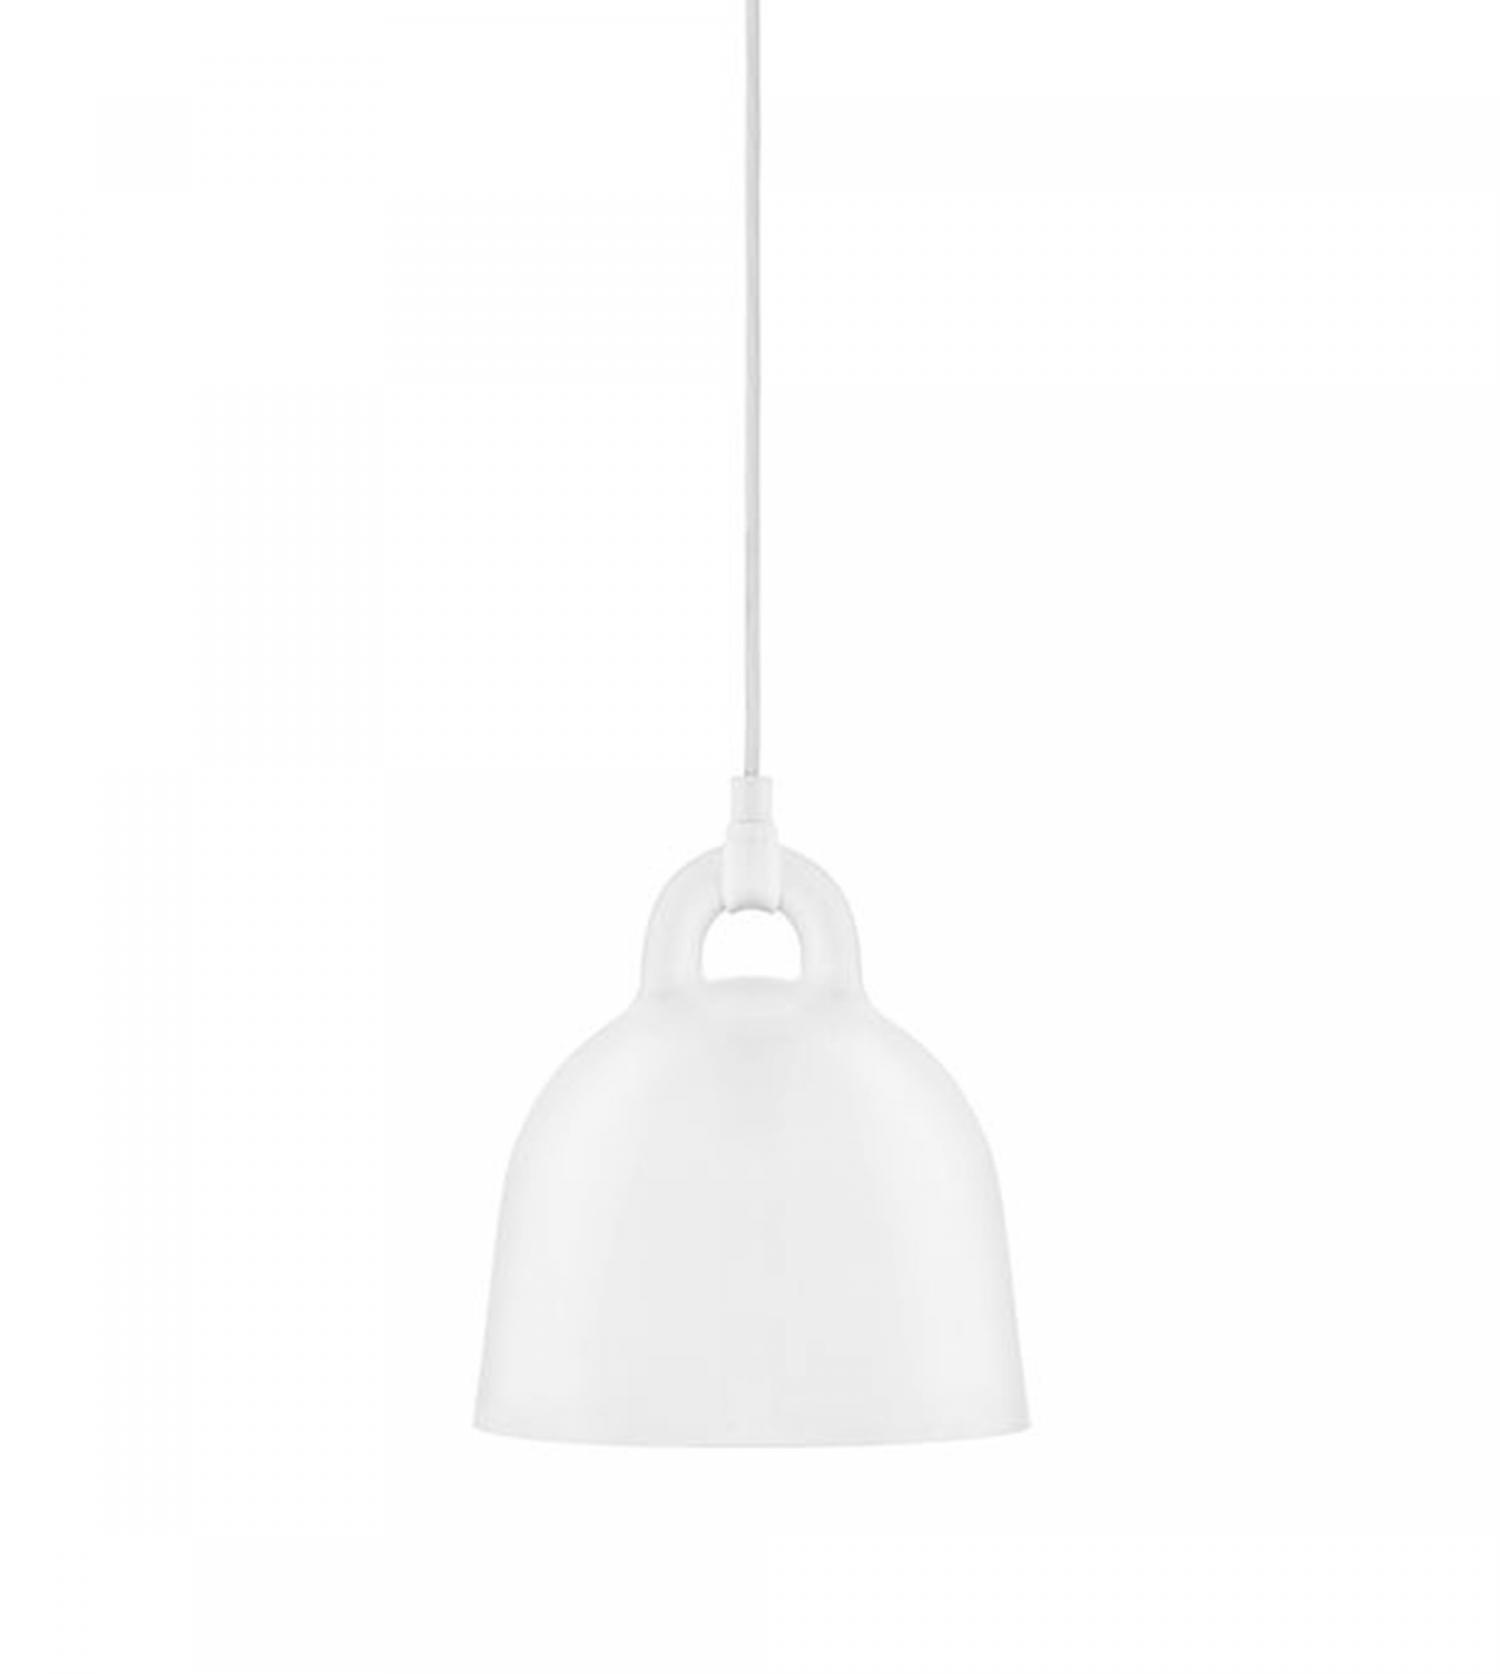 Suspension Bell lamp X-small